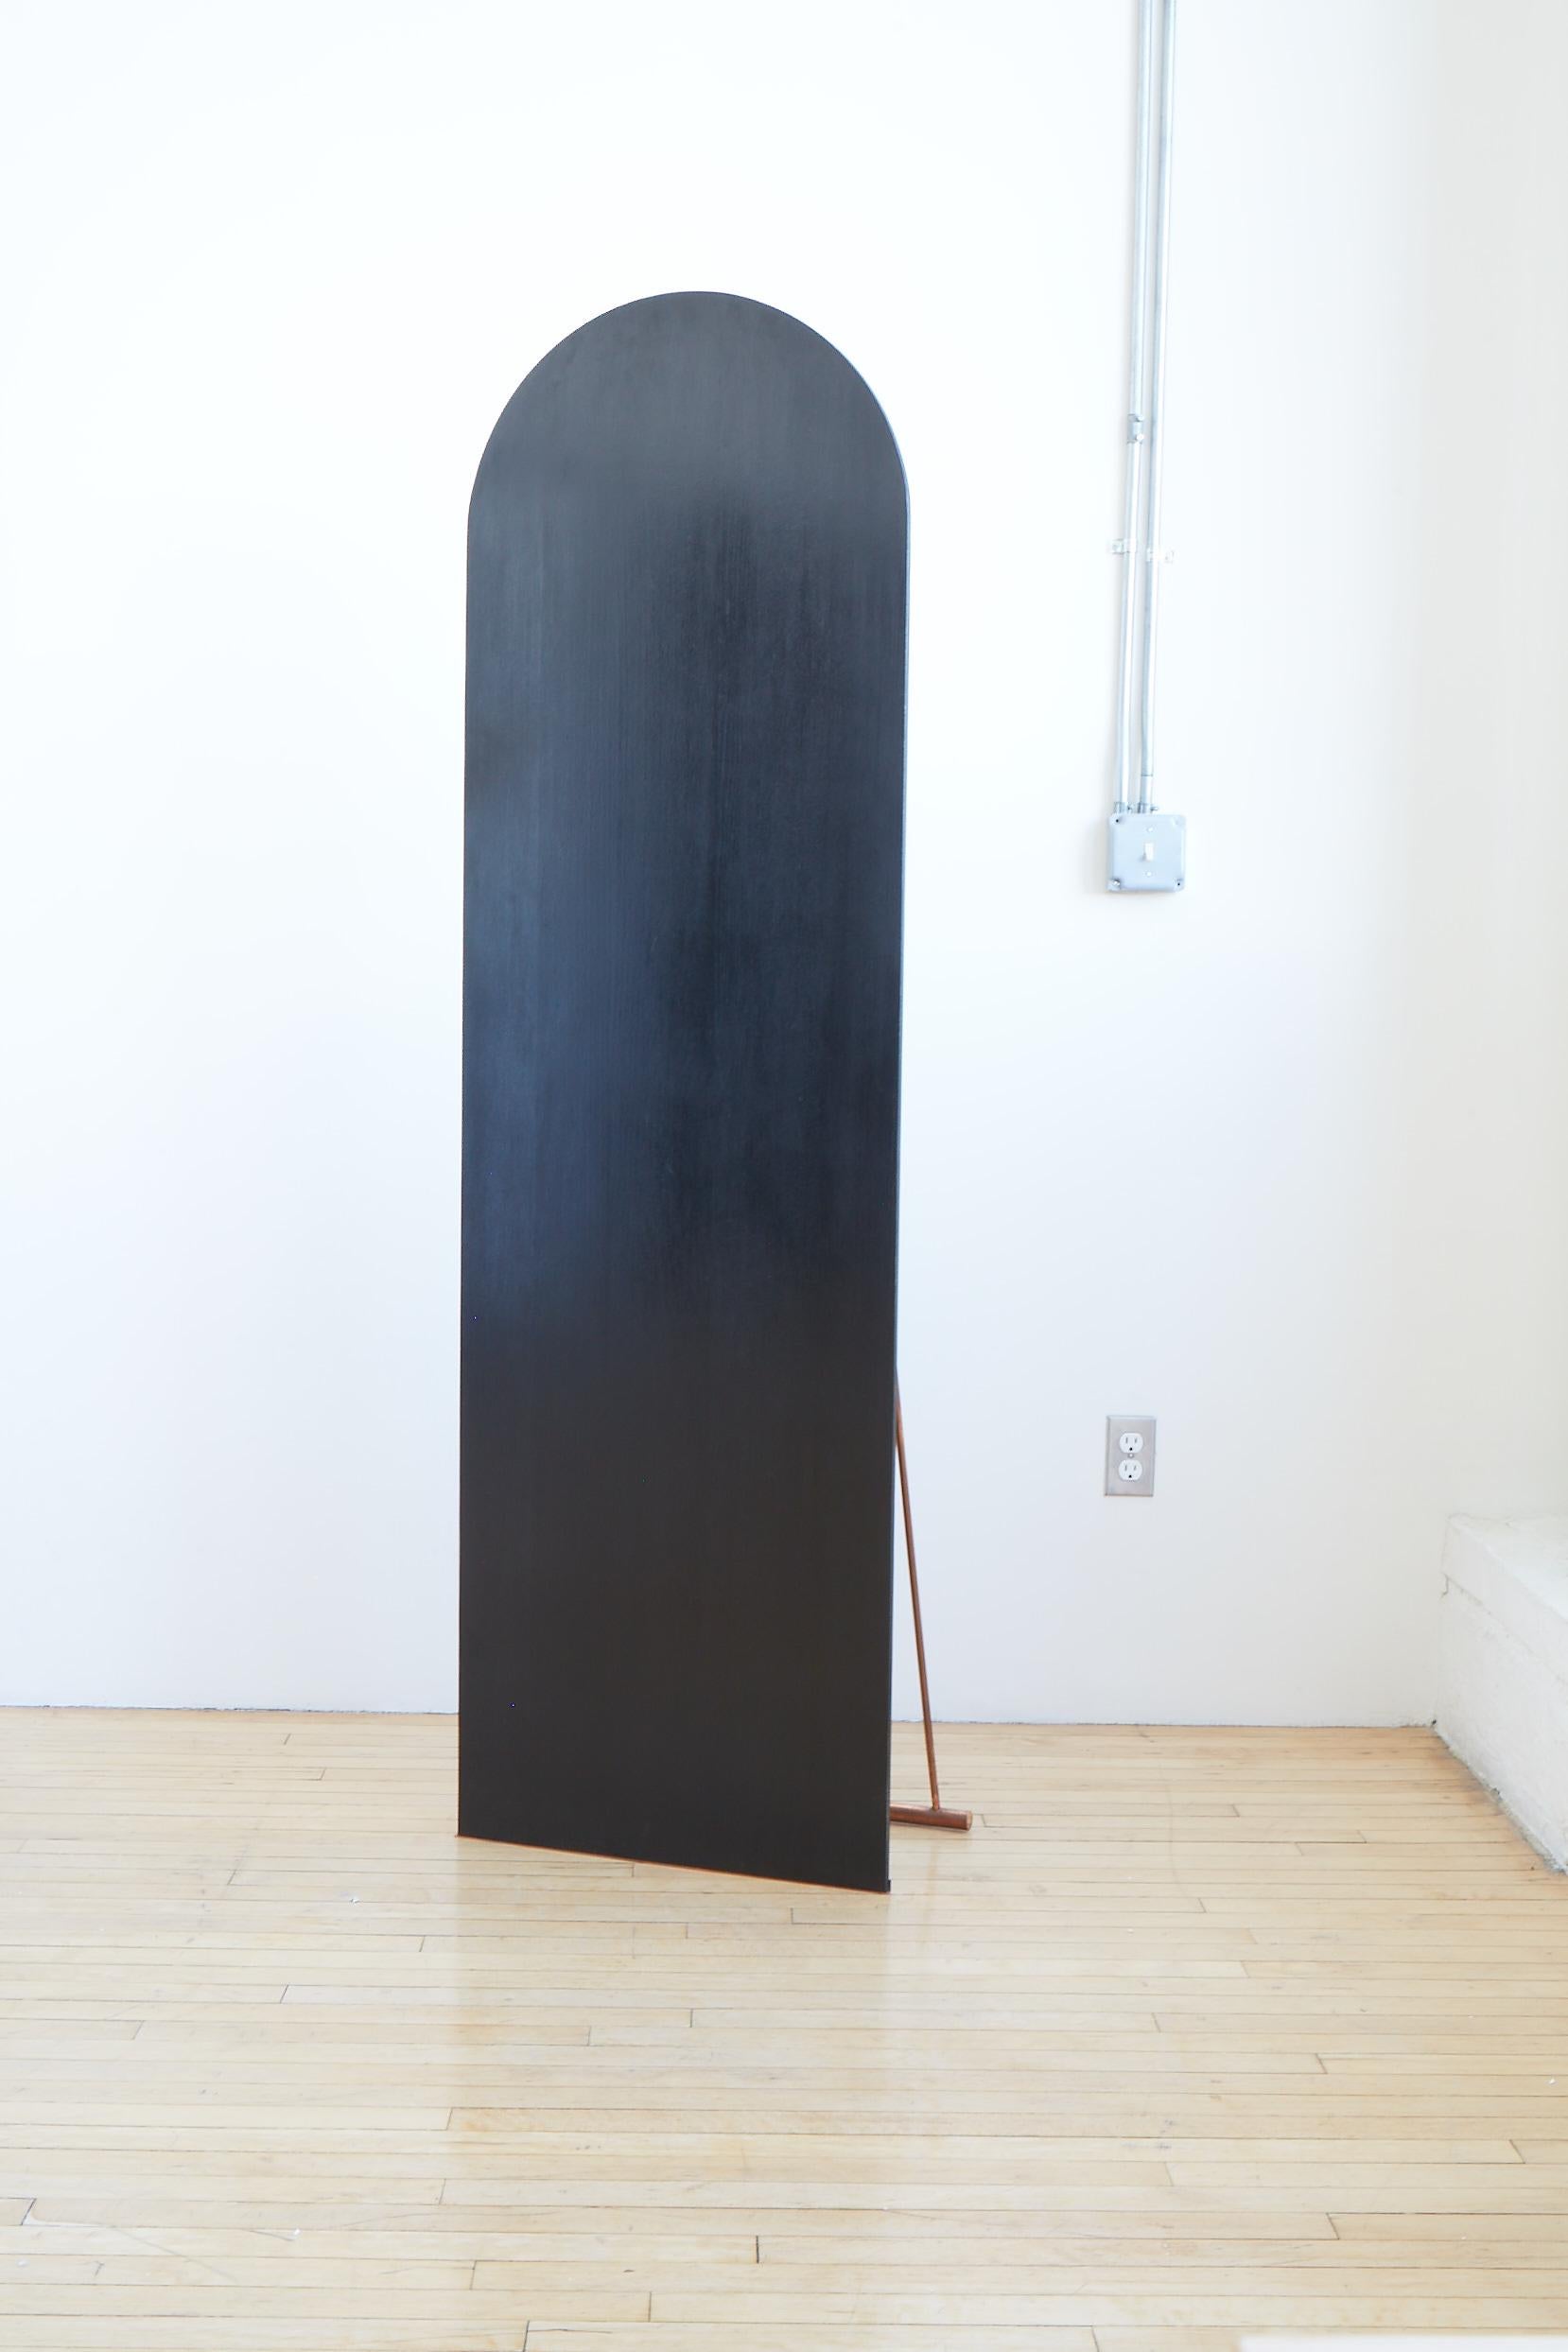 This phantasmagoric, conceptual representation of a full-scale free-standing floor mirror by Belgian artist Nel Verbeke is from her 2016 collection 'Embrace Melancholy'. The piece, entitled 'Black Mirror' refers to 19th century practices of viewing